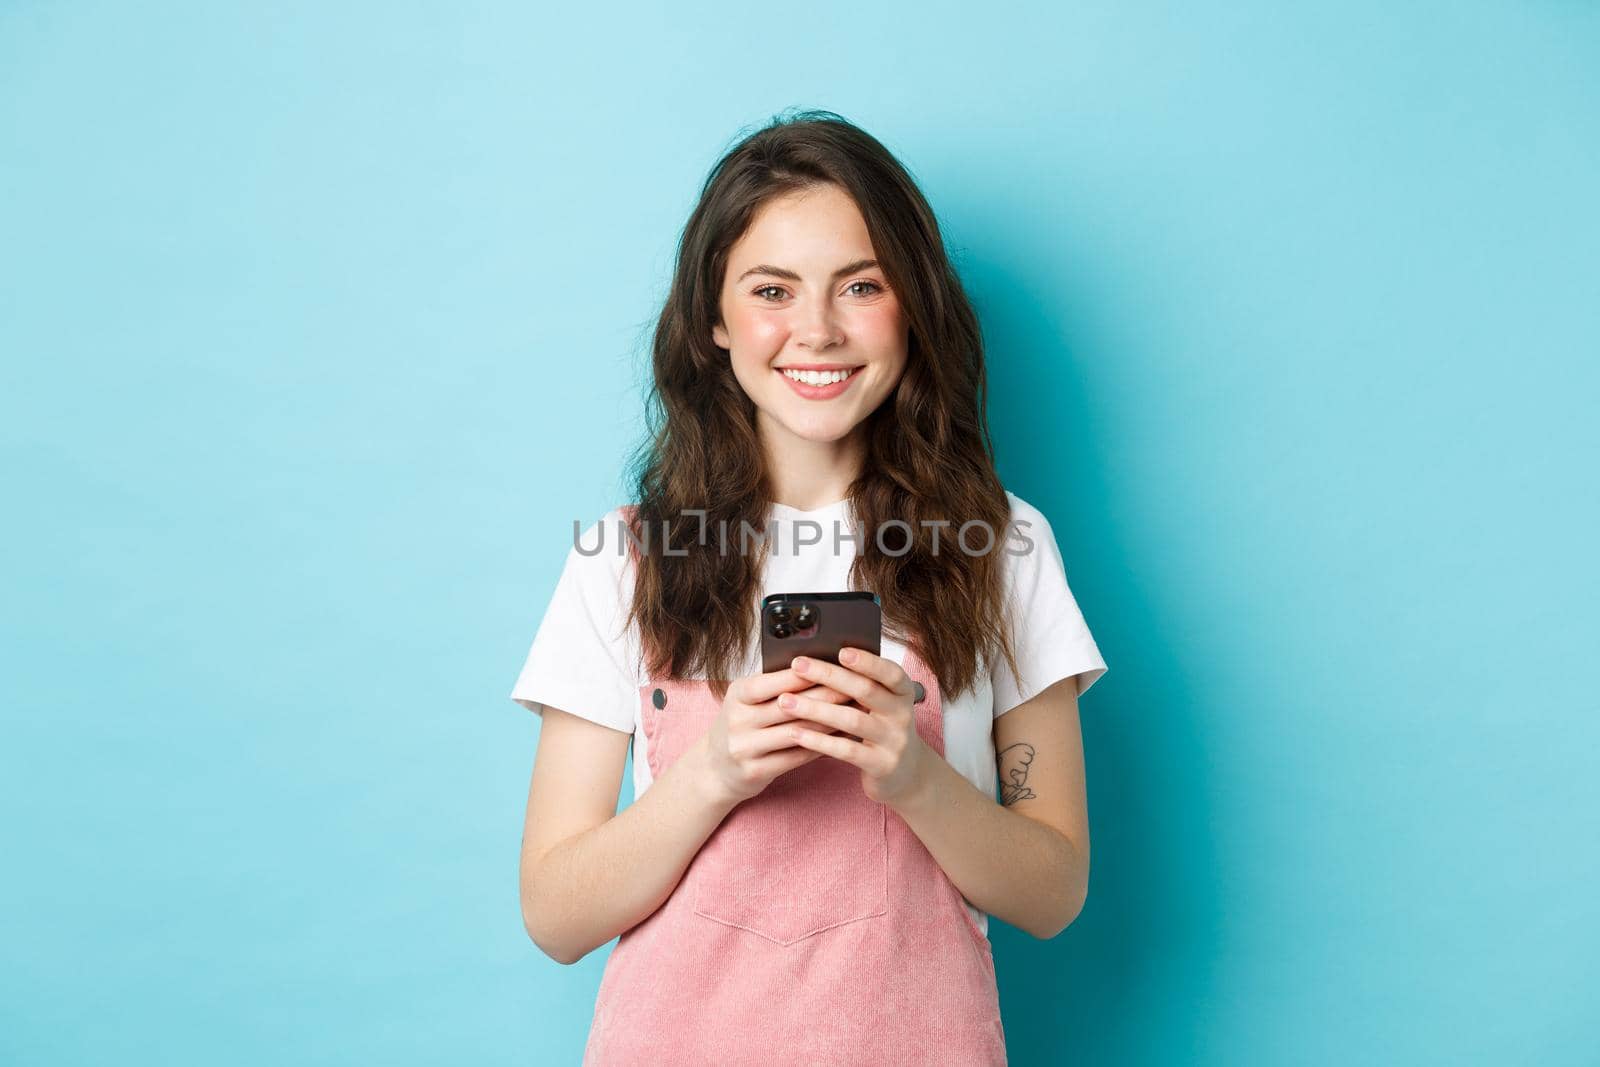 Young cute girl holding mobile phone, smiling and looking at camera. Woman using smartphone app, chatting on social media or shopping online, blue background.